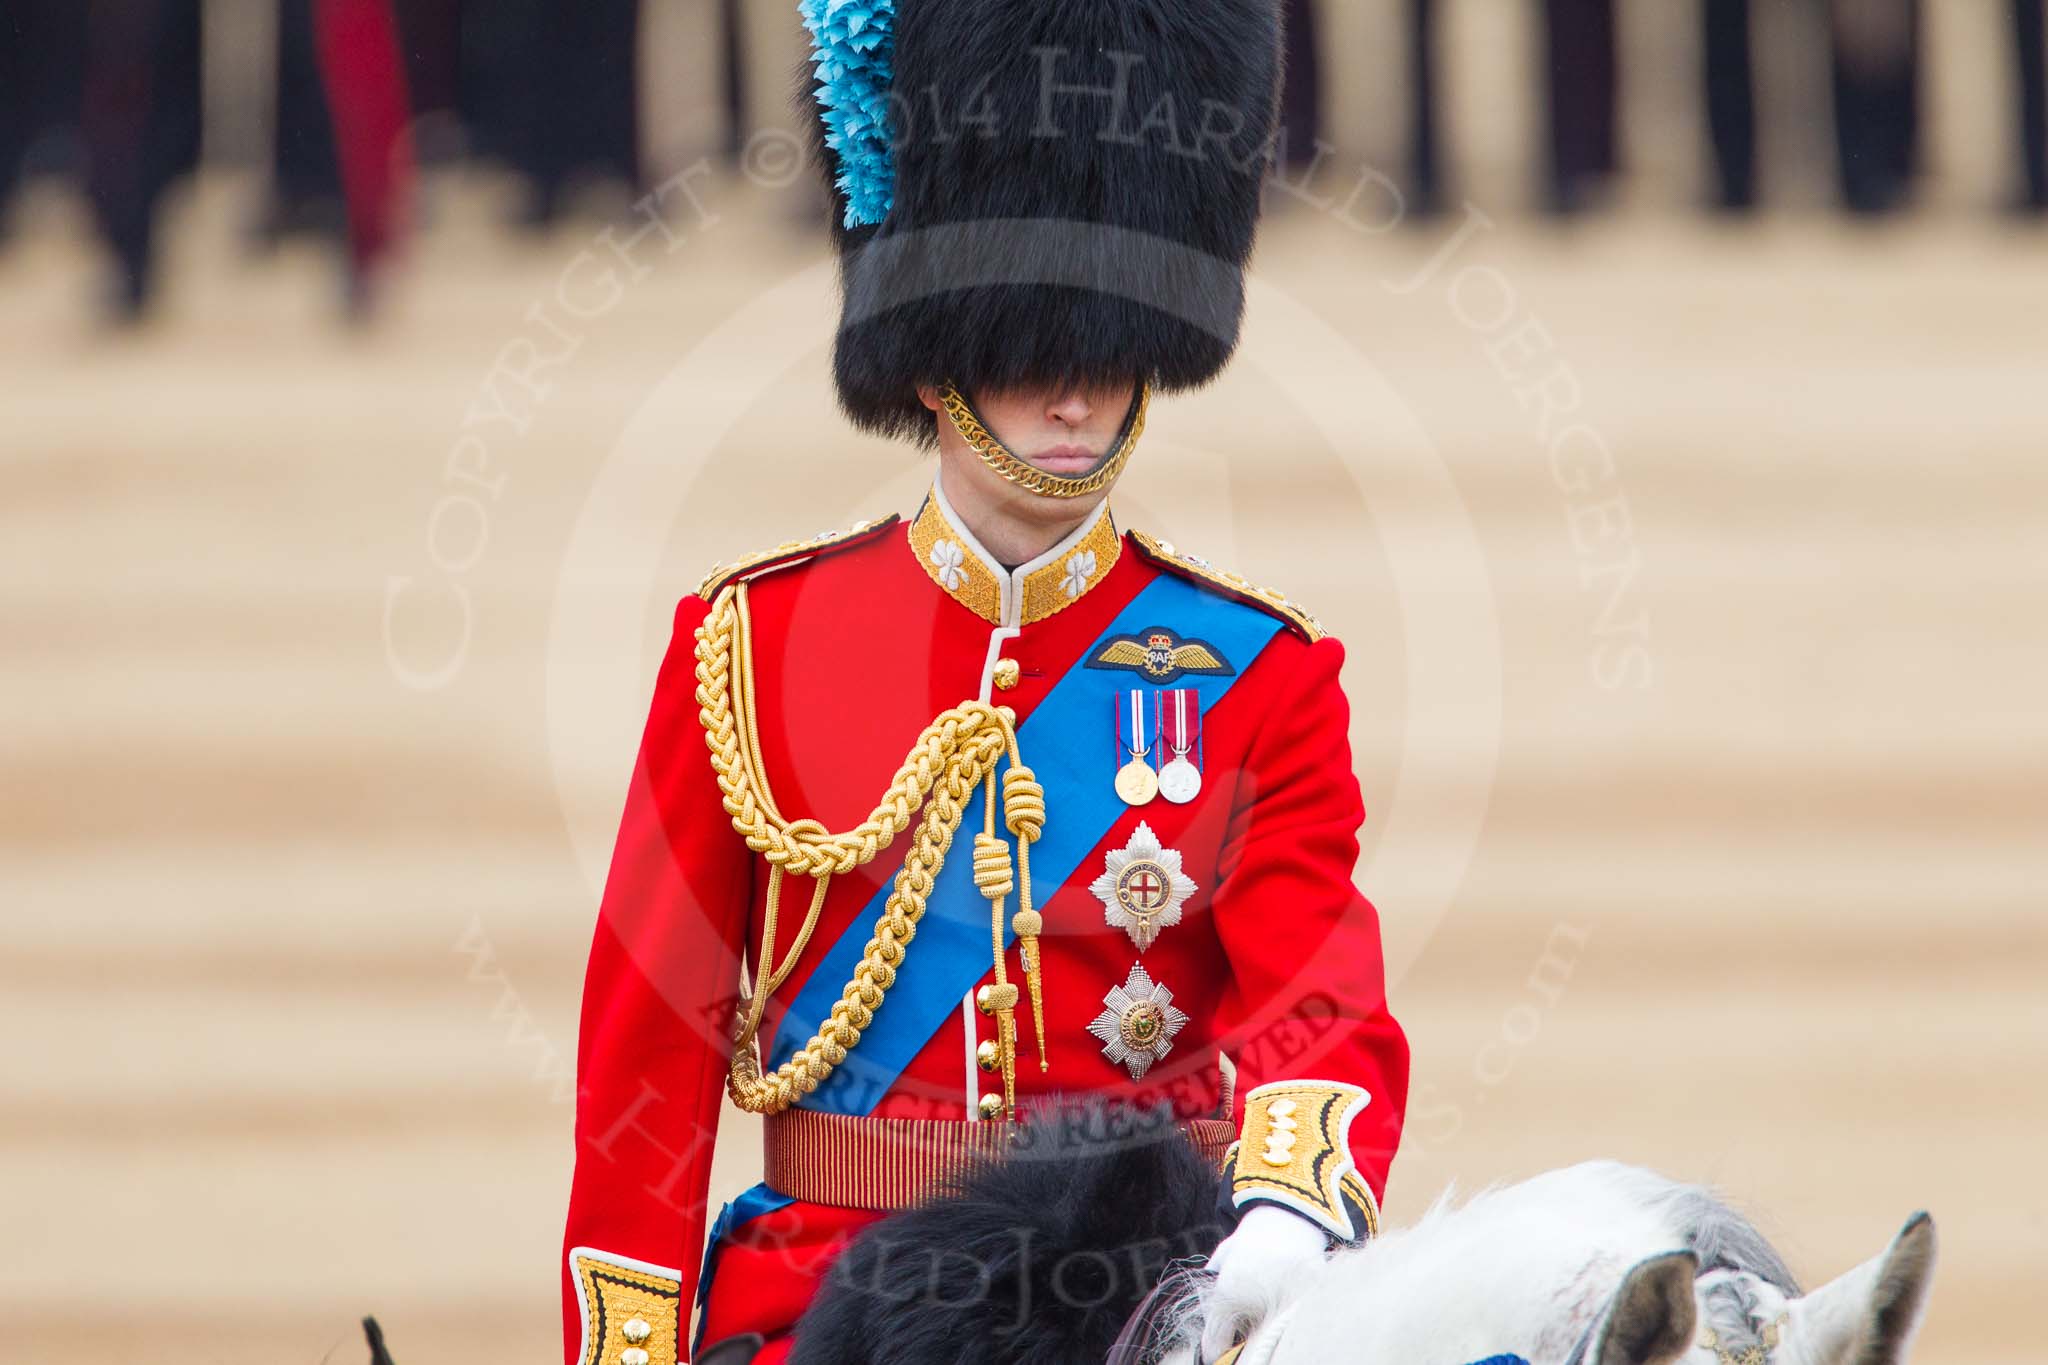 Trooping the Colour 2014.
Horse Guards Parade, Westminster,
London SW1A,

United Kingdom,
on 14 June 2014 at 11:07, image #435